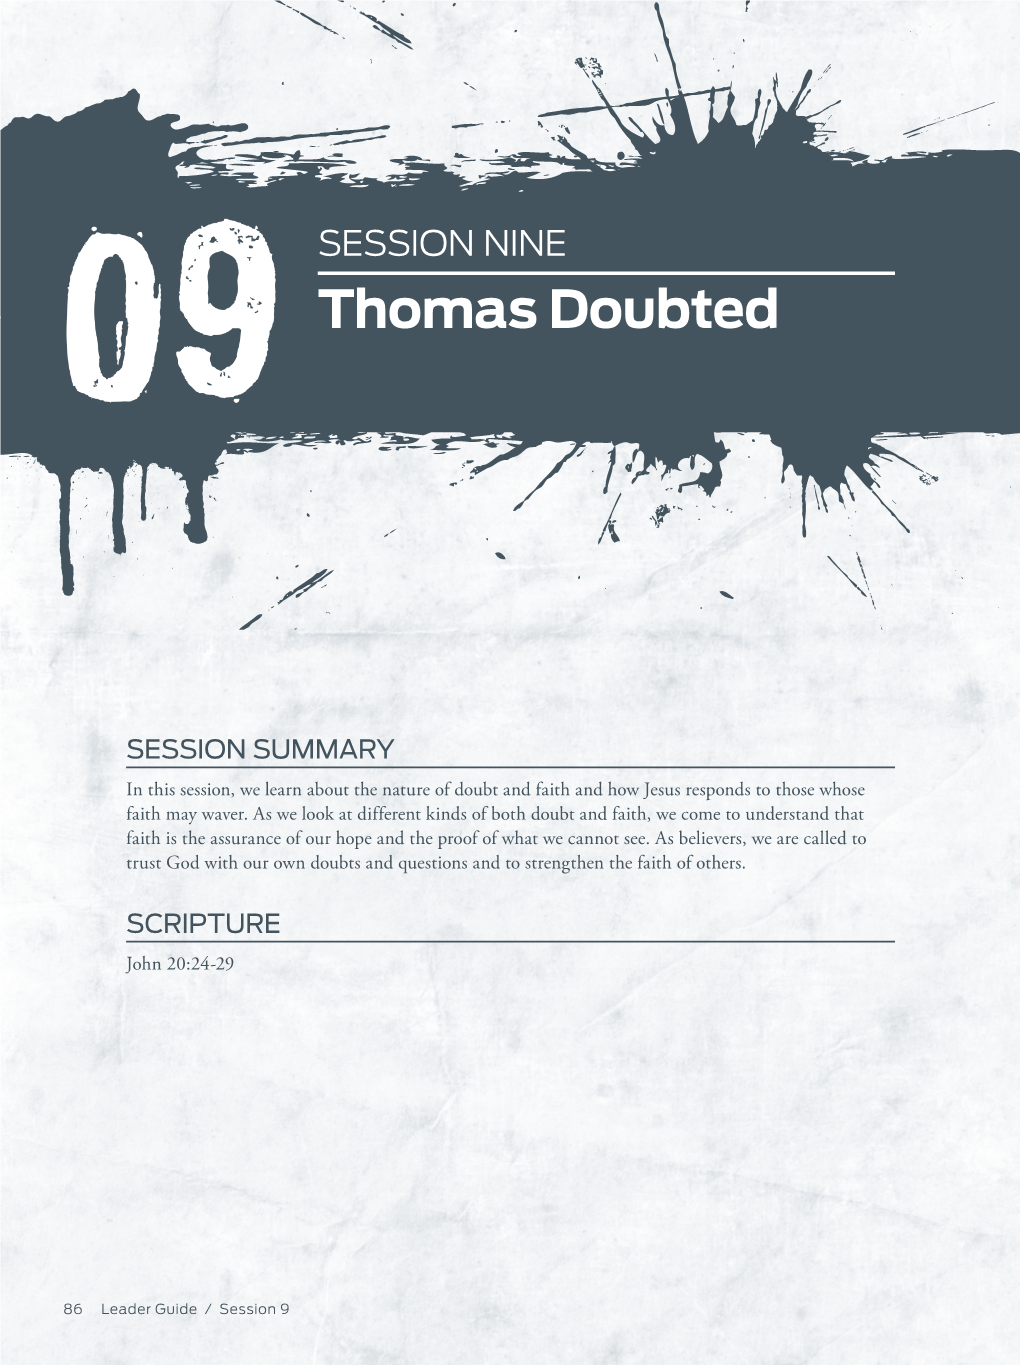 Thomas Doubted